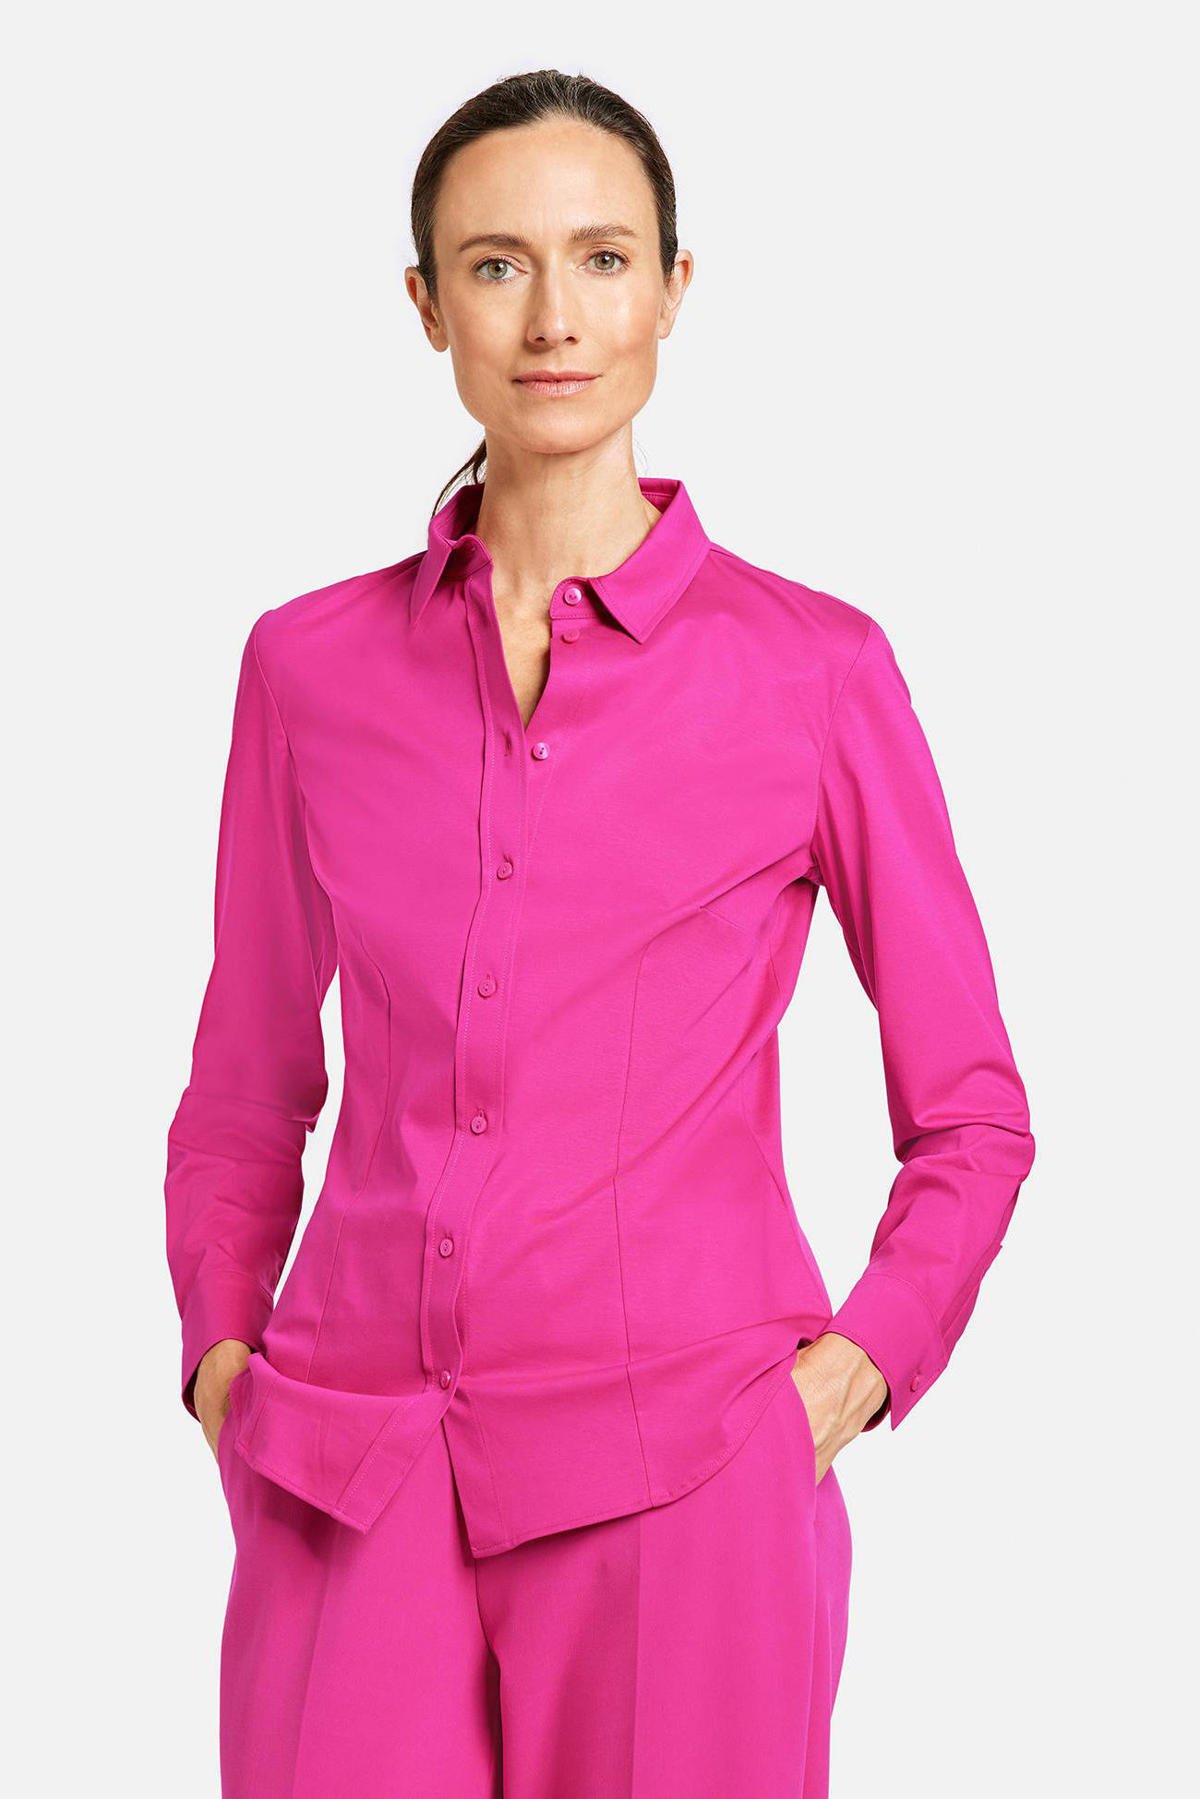 micro Enzovoorts Inloggegevens Gerry Weber blouse roze | wehkamp